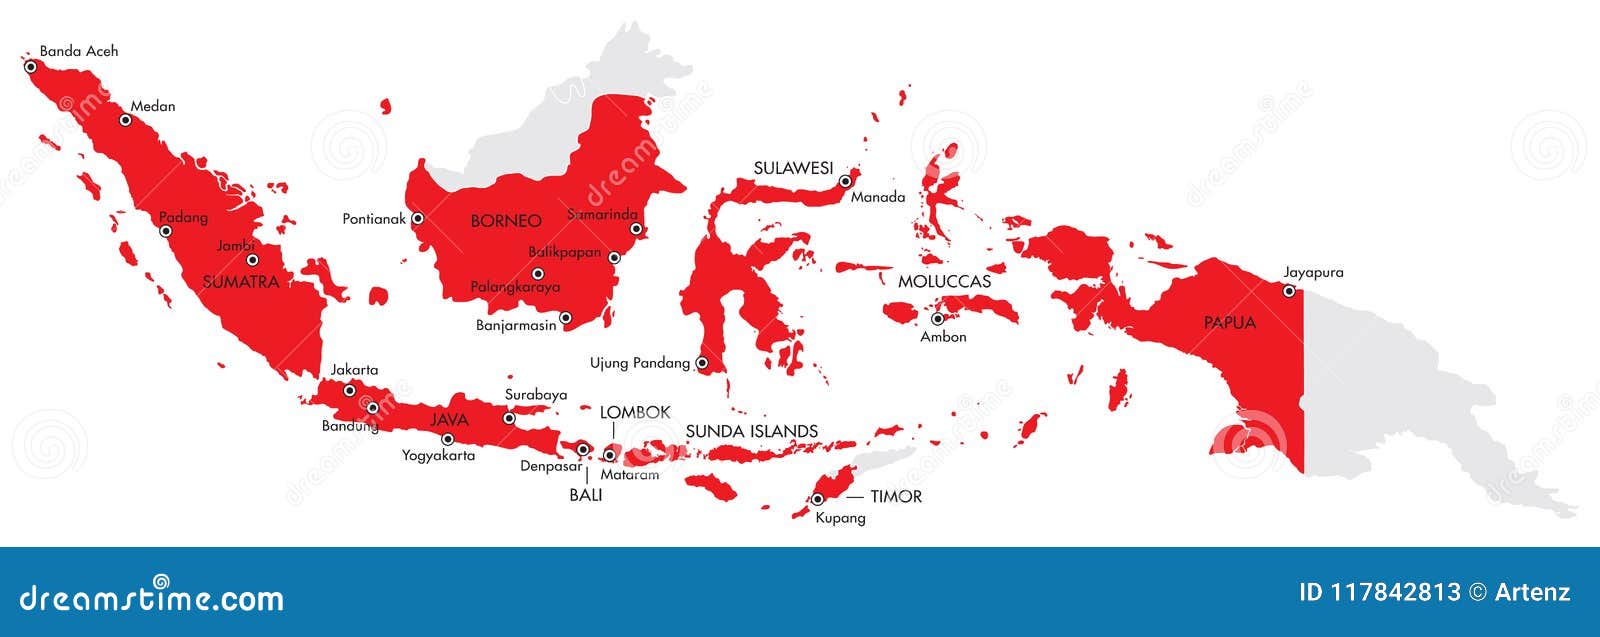 Vector Map Of Indonesia With Major Cities Stock Vector - Illustration